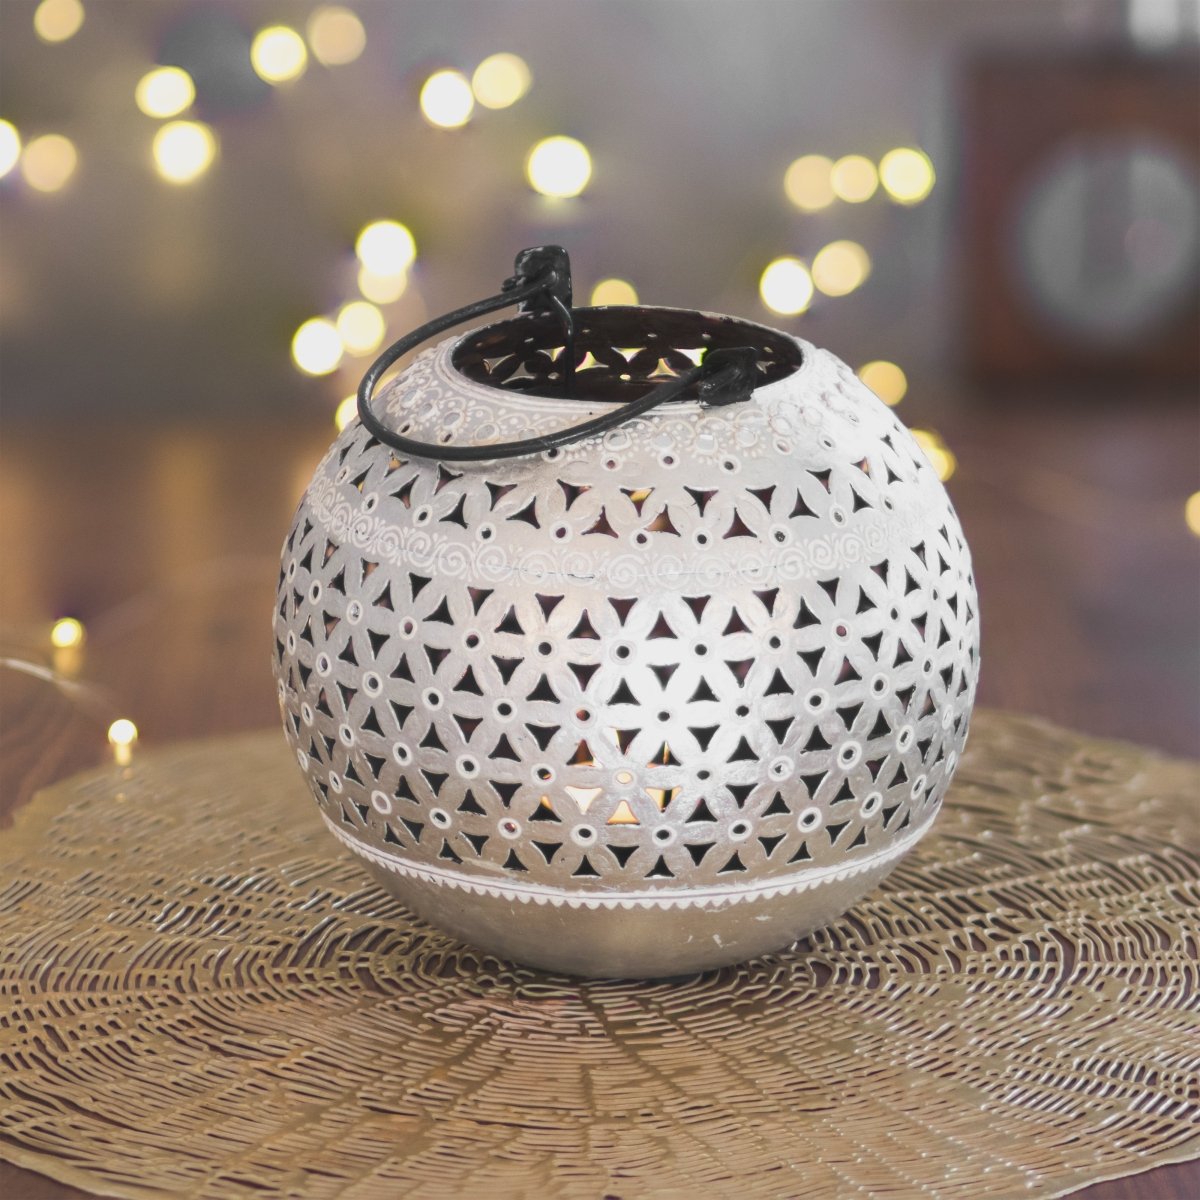 Kezevel Metal Tealight Candle Holder - Handcrafted Round Silver Finish Candle Holders for Home Decor, Table Decor, Puja Decor